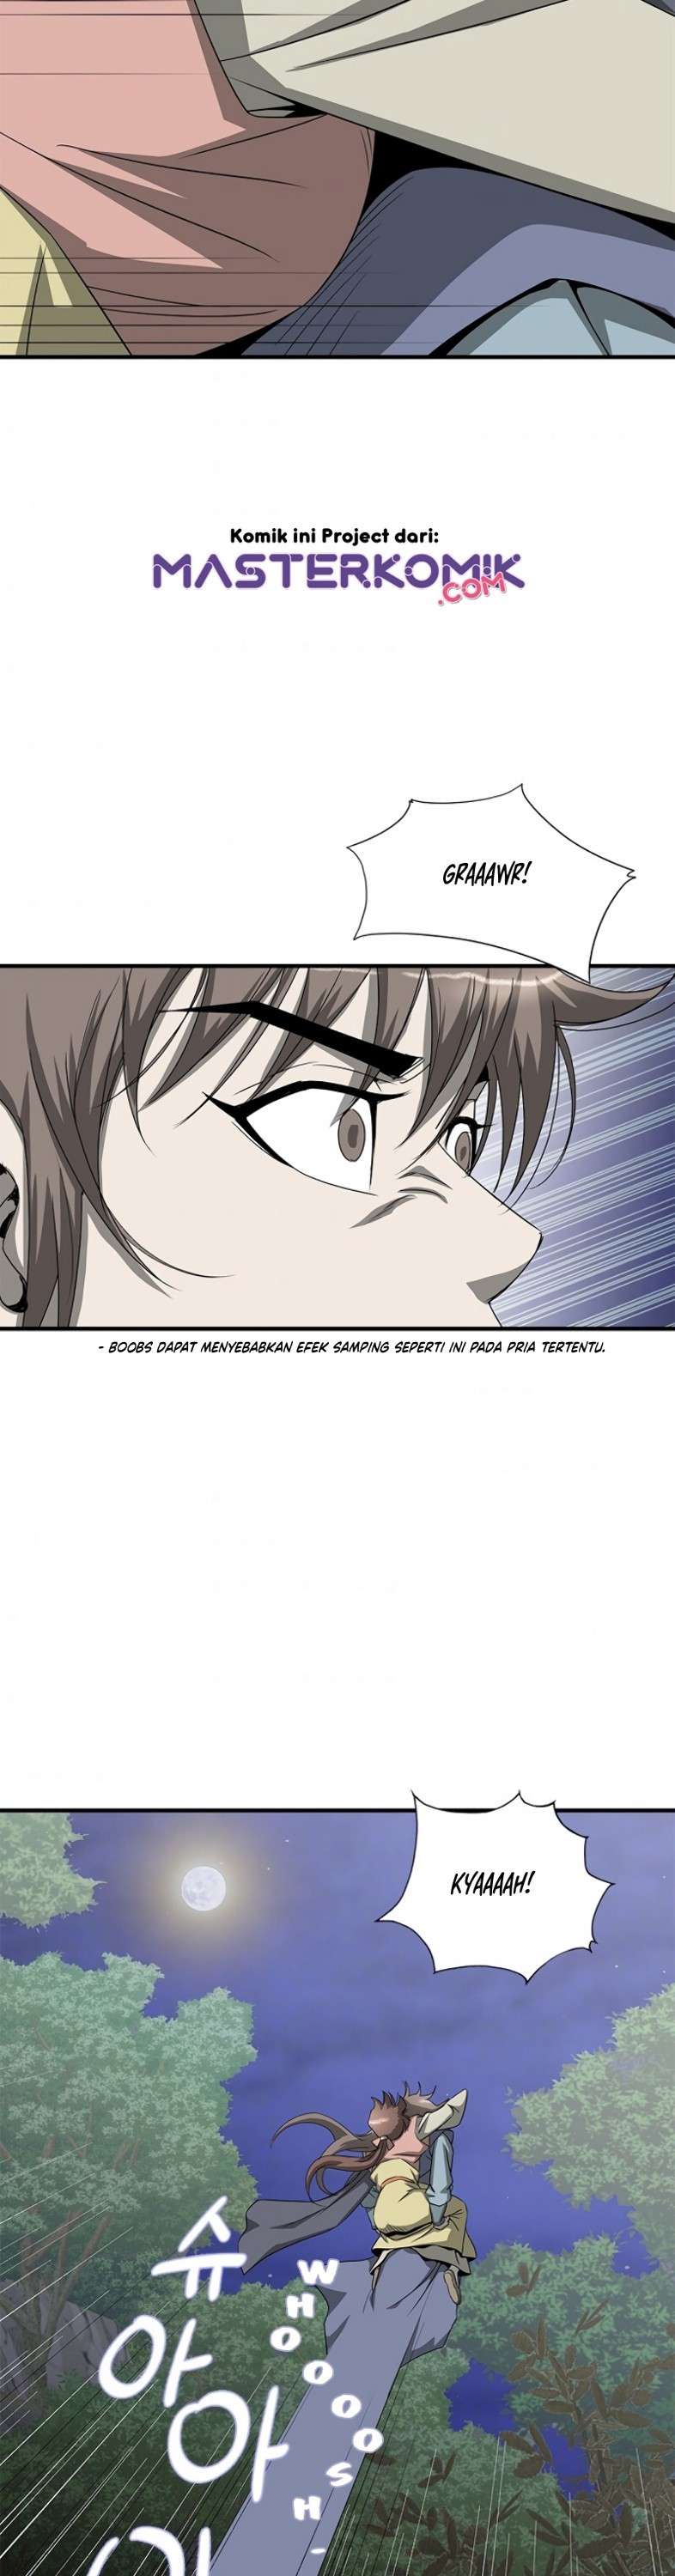 Strong Gale, Mad Dragon Chapter 38